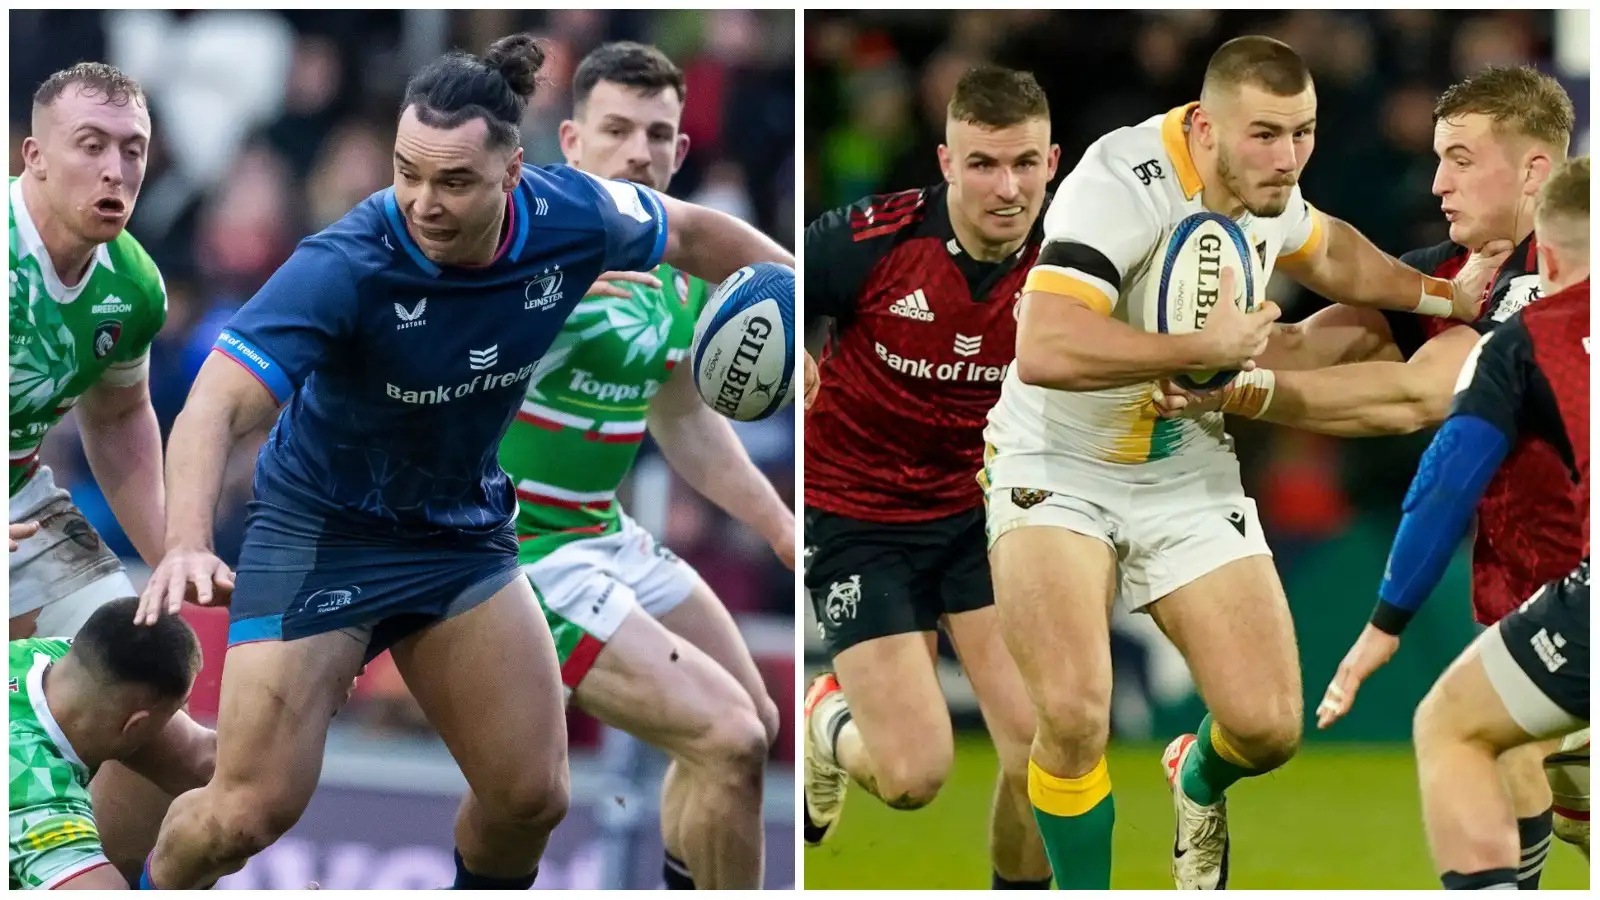 Leinster wing James Lowe against Leicester Tigers and Northampton Saints wing Ollie Sleightholme against Munster.